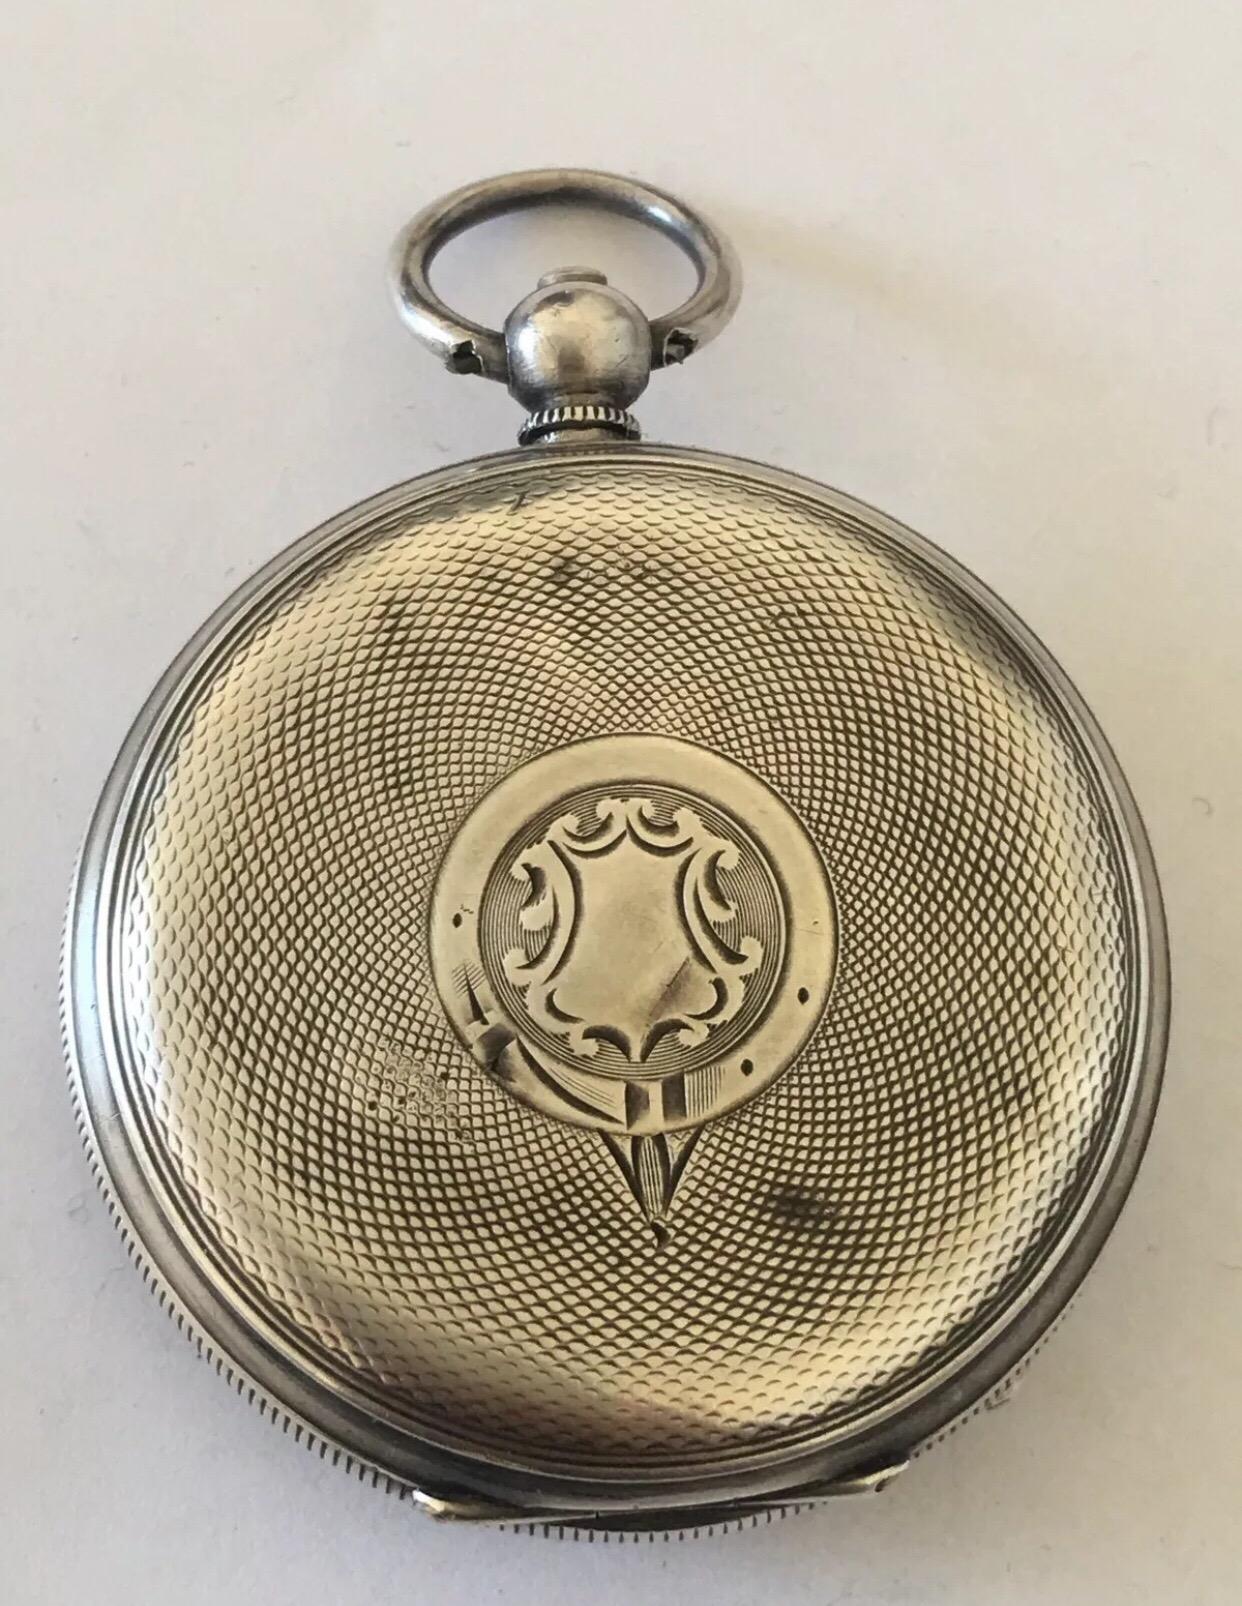 Antique Silver Swiss Made Pocket Watch Signed H. Samuel Manchester “ACME LEVER”. 


This watch is working and ticking well but I cannot guarantee the time accuracy. I am selling an unserviced watch. Some visible tiny dents on the back cover as shown